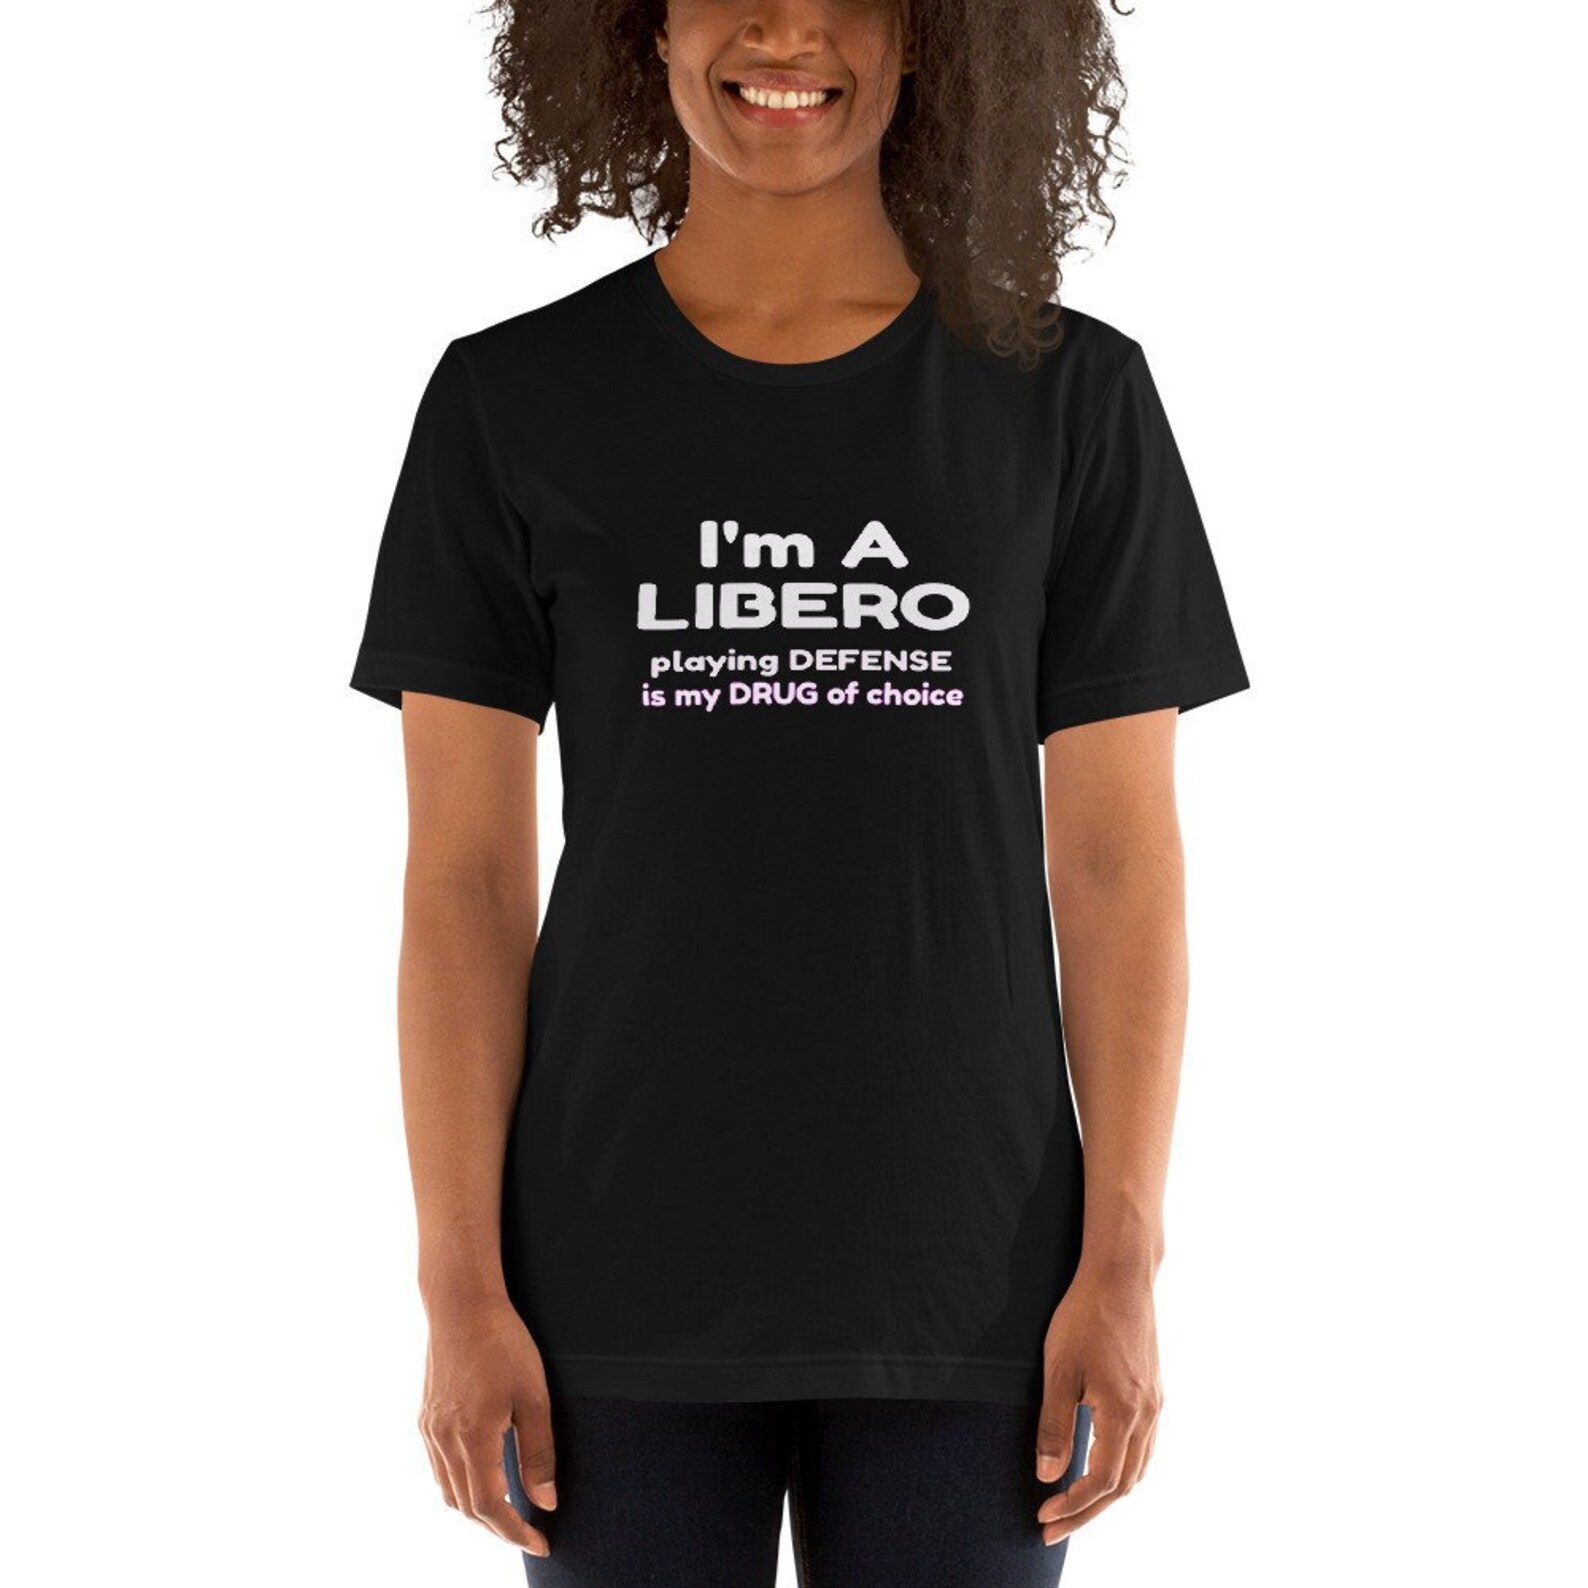 I'm A Libero

playing DEFENSE is

my drug of choice

Short Sleeve Black Volleyball T Shirt Ideas Are Great Volleyball Gifts For Players